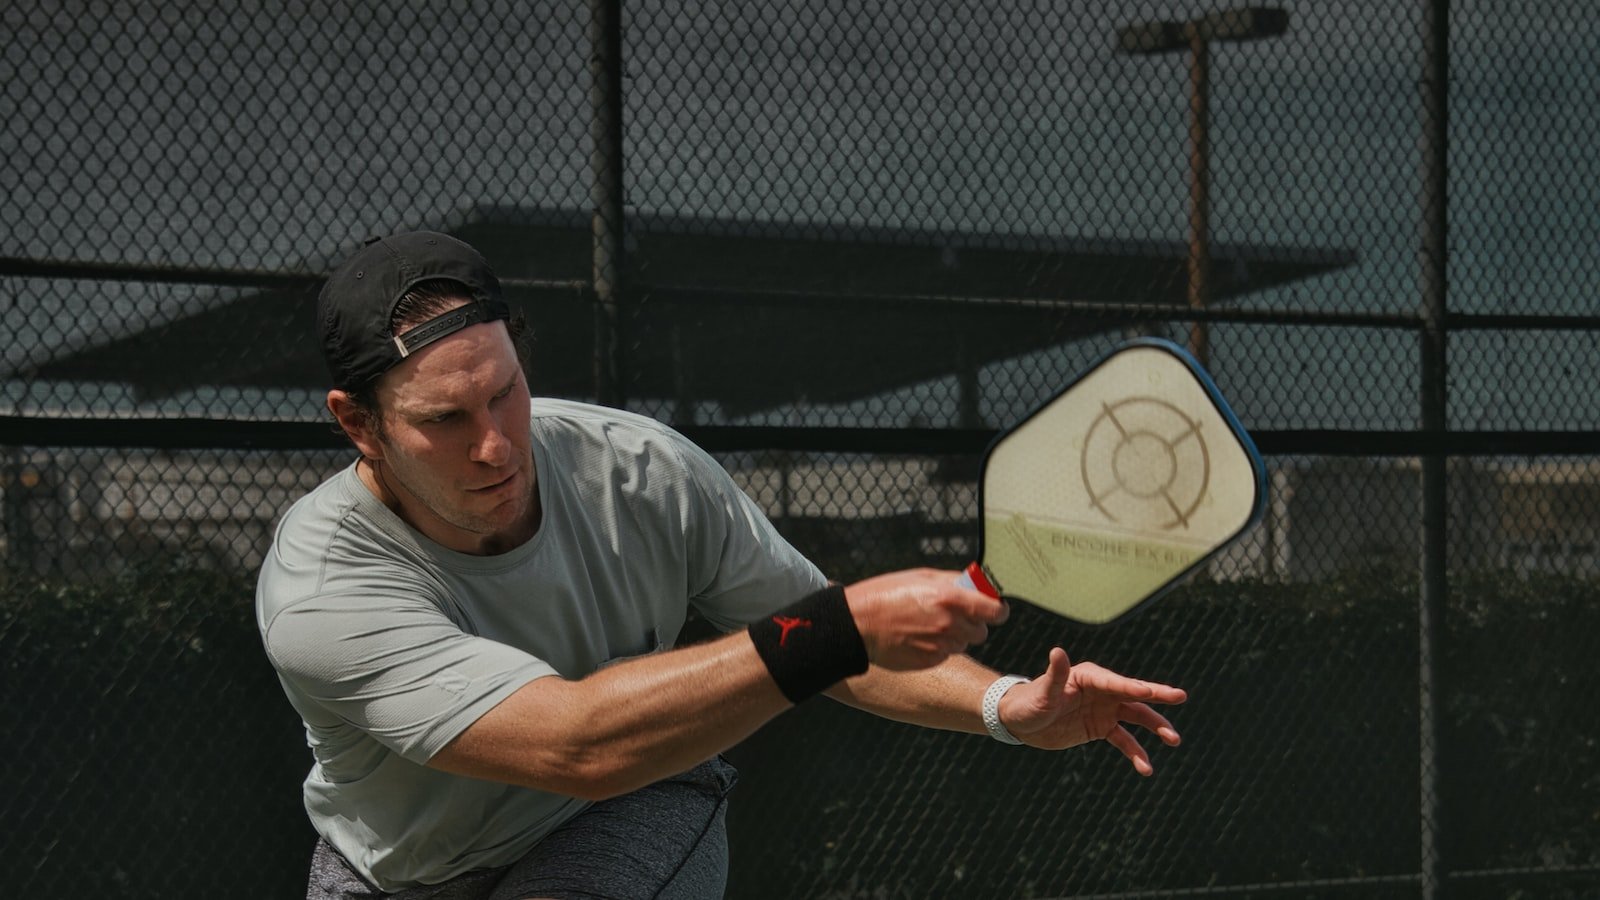 What’s New in Pickleball: Latest Innovations in the Game